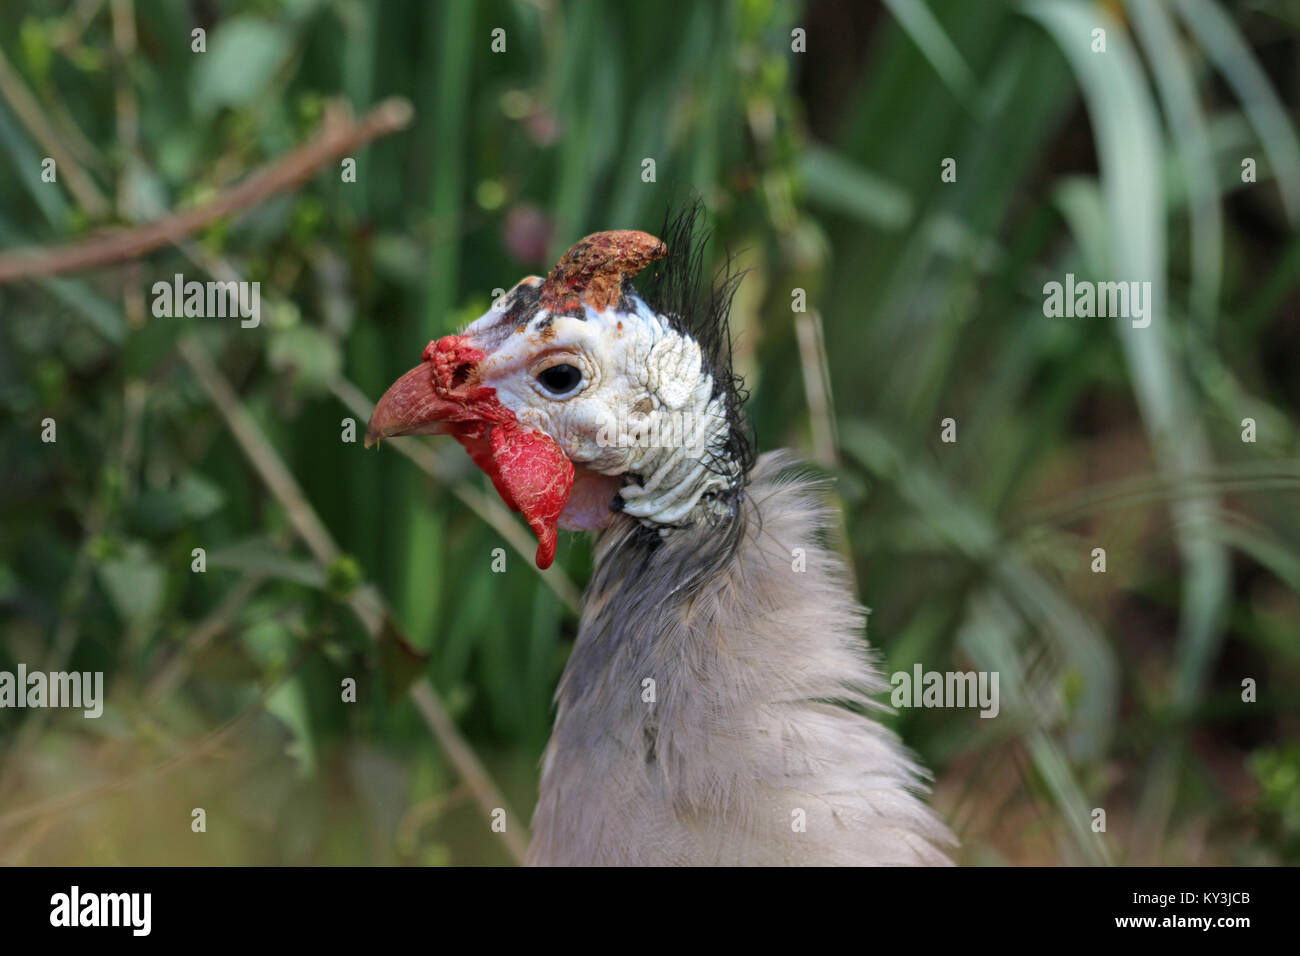 Head and shoulders in profile of a helmeted guineafowl (Numida meleagris) with a background of vegetation. Stock Photo